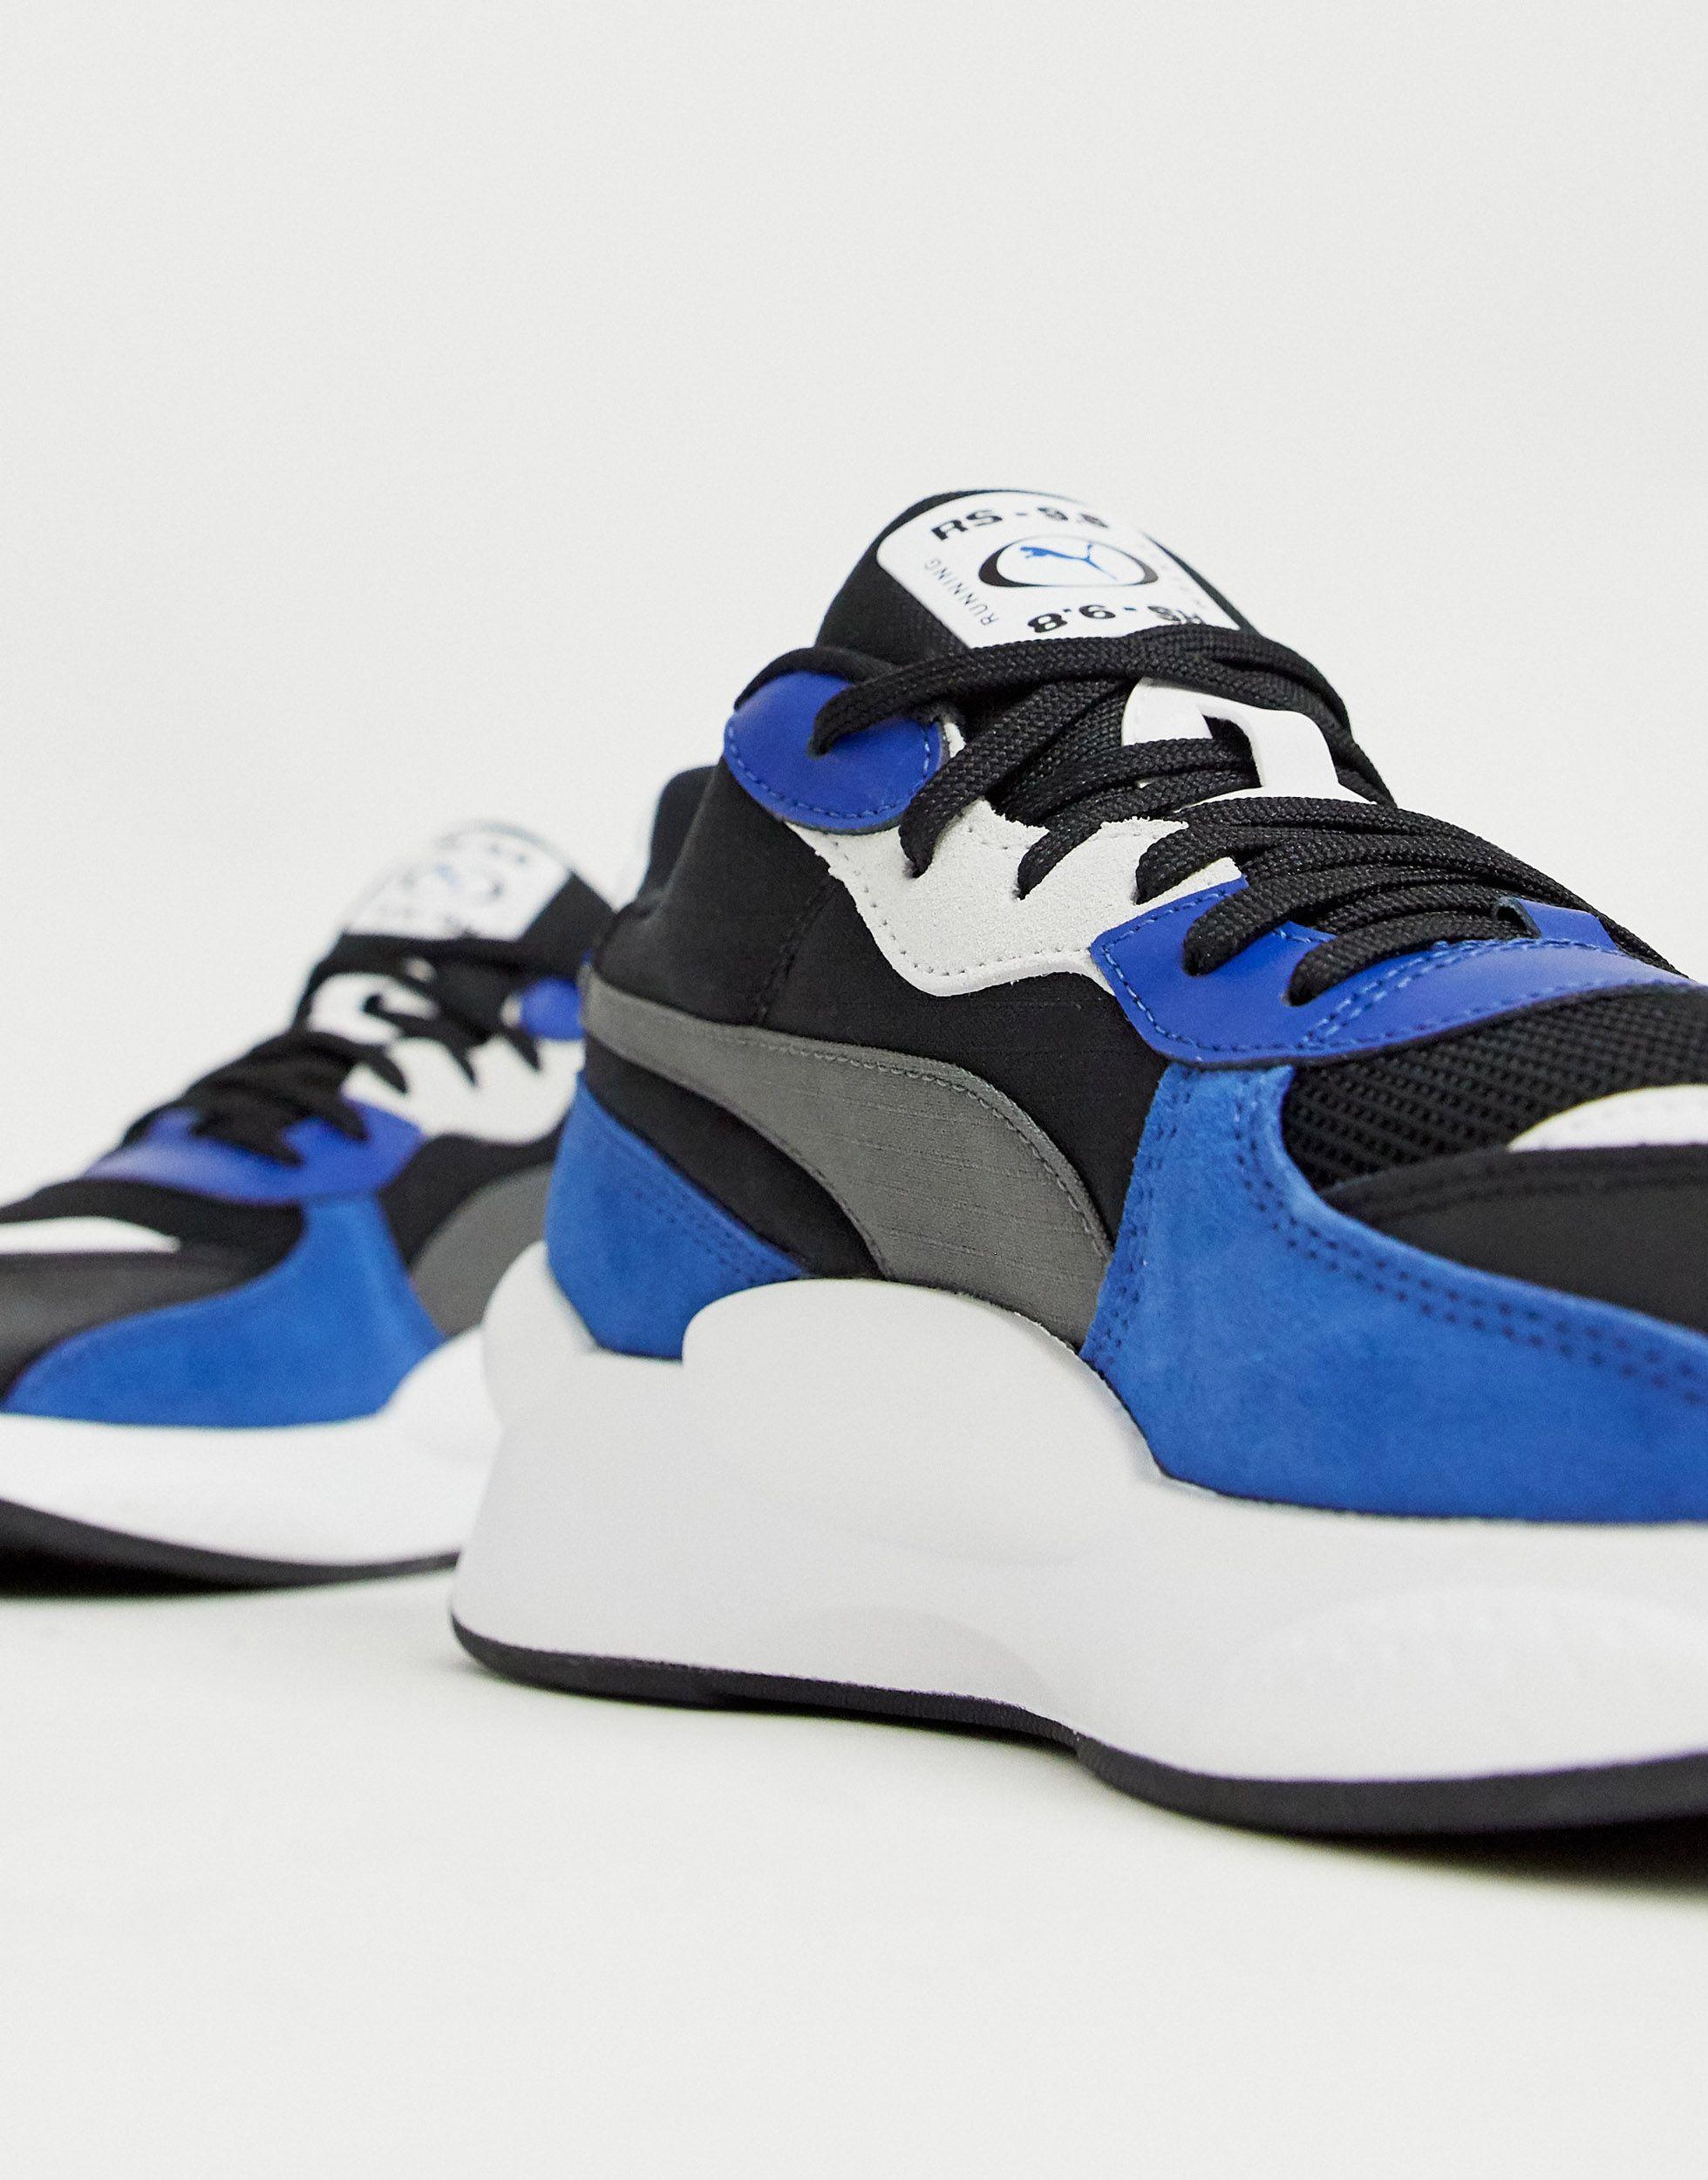 PUMA Rubber Rs 9.8 Space Sneakers in Blue for Men - Lyst